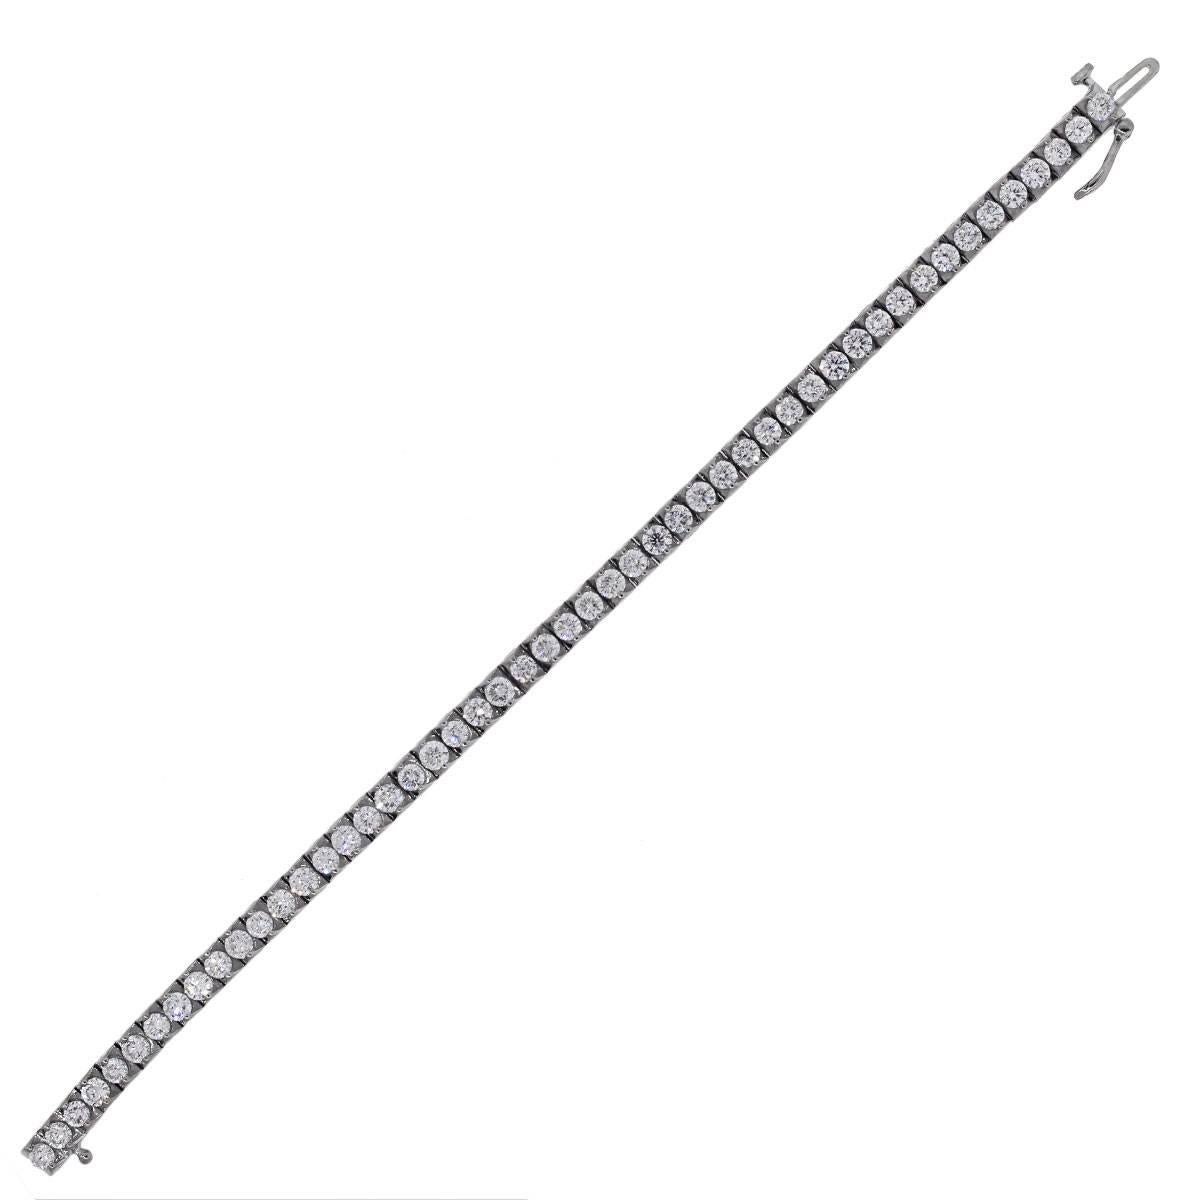 Material: 14k white gold
Diamond Details: Approximately 7ctw of round brillaint cut diamonds. Diamonds are G/H in color and VS in clarity.
Clasp: Tongue in box clasp with safety lock
Total Weight: 20.0g (12.9dwt)
Measurements: Will fit a 7"